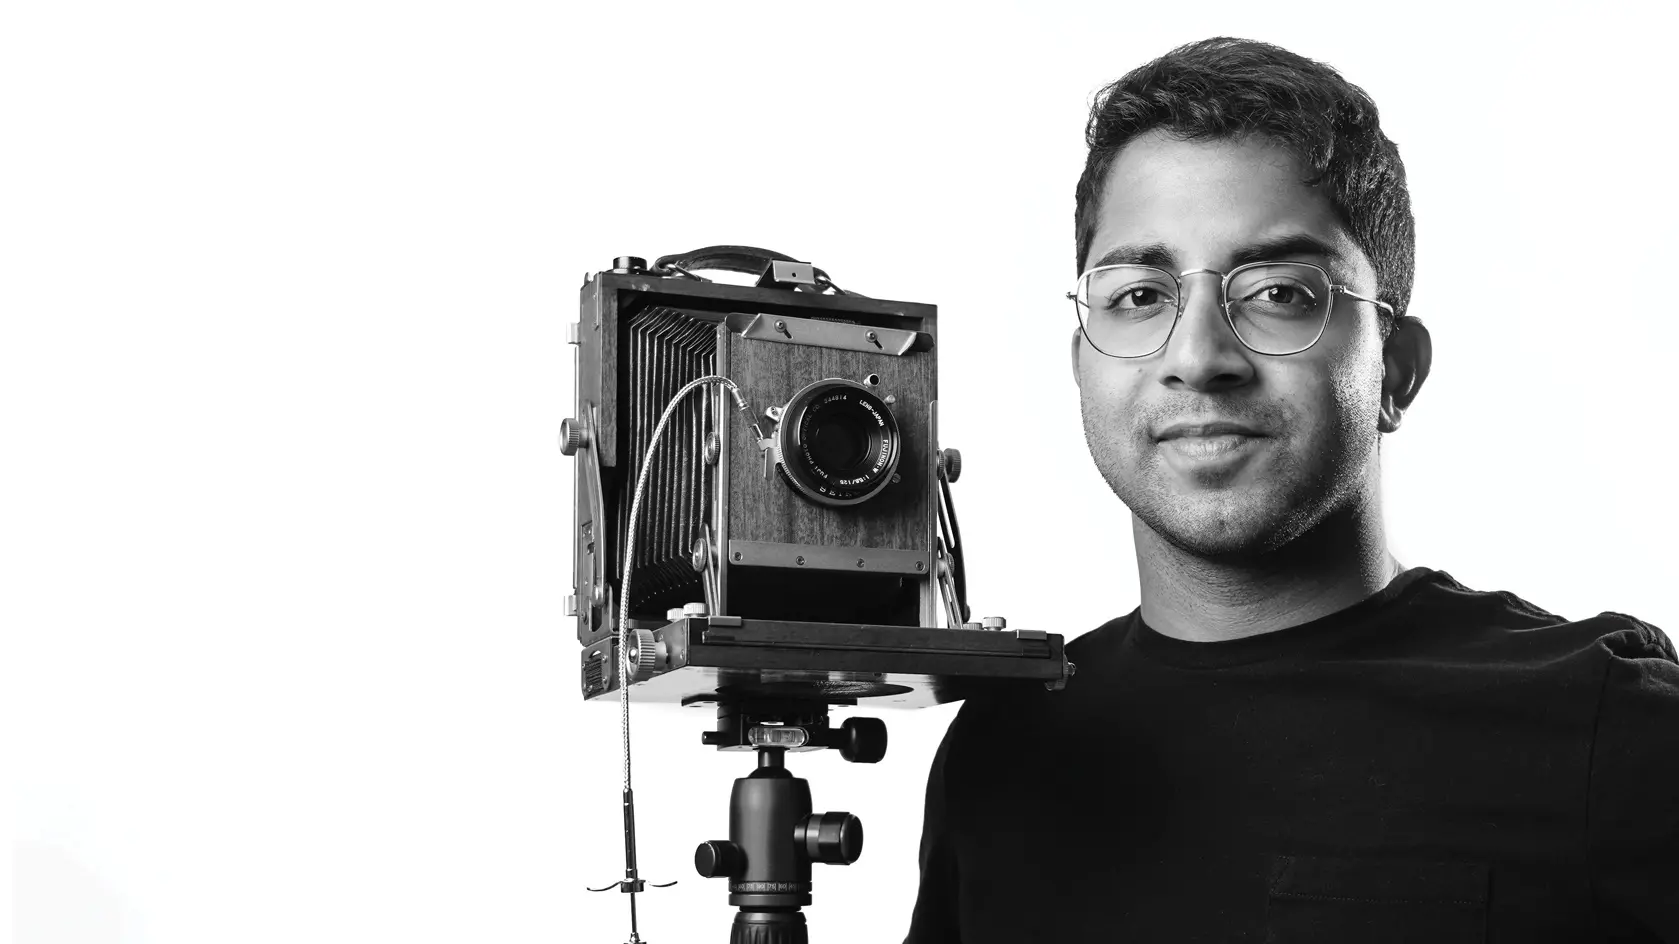 A young man of Indian descent stands beside a camera on a tripod and subtly smiles in a black and white self-portrait. He wears wire-rimmed glasses and his dark hair is short on the sides and a little curly on top.